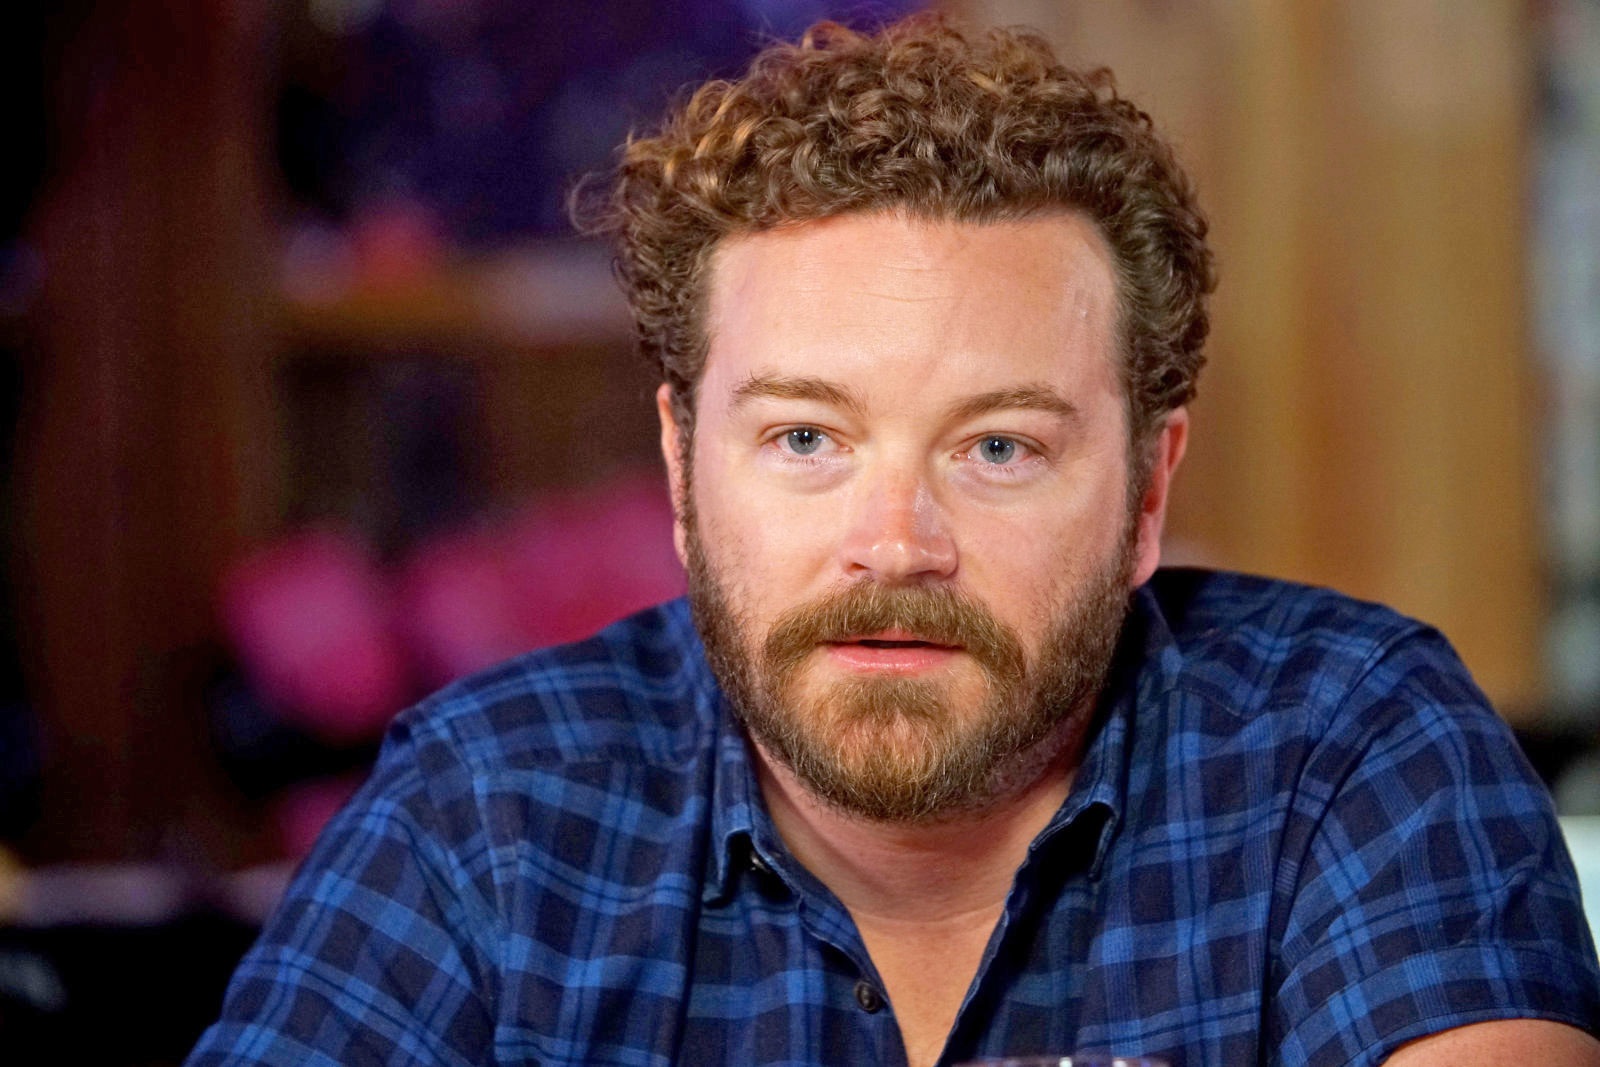 Netflix cuts ties with Danny Masterson following rape allegations